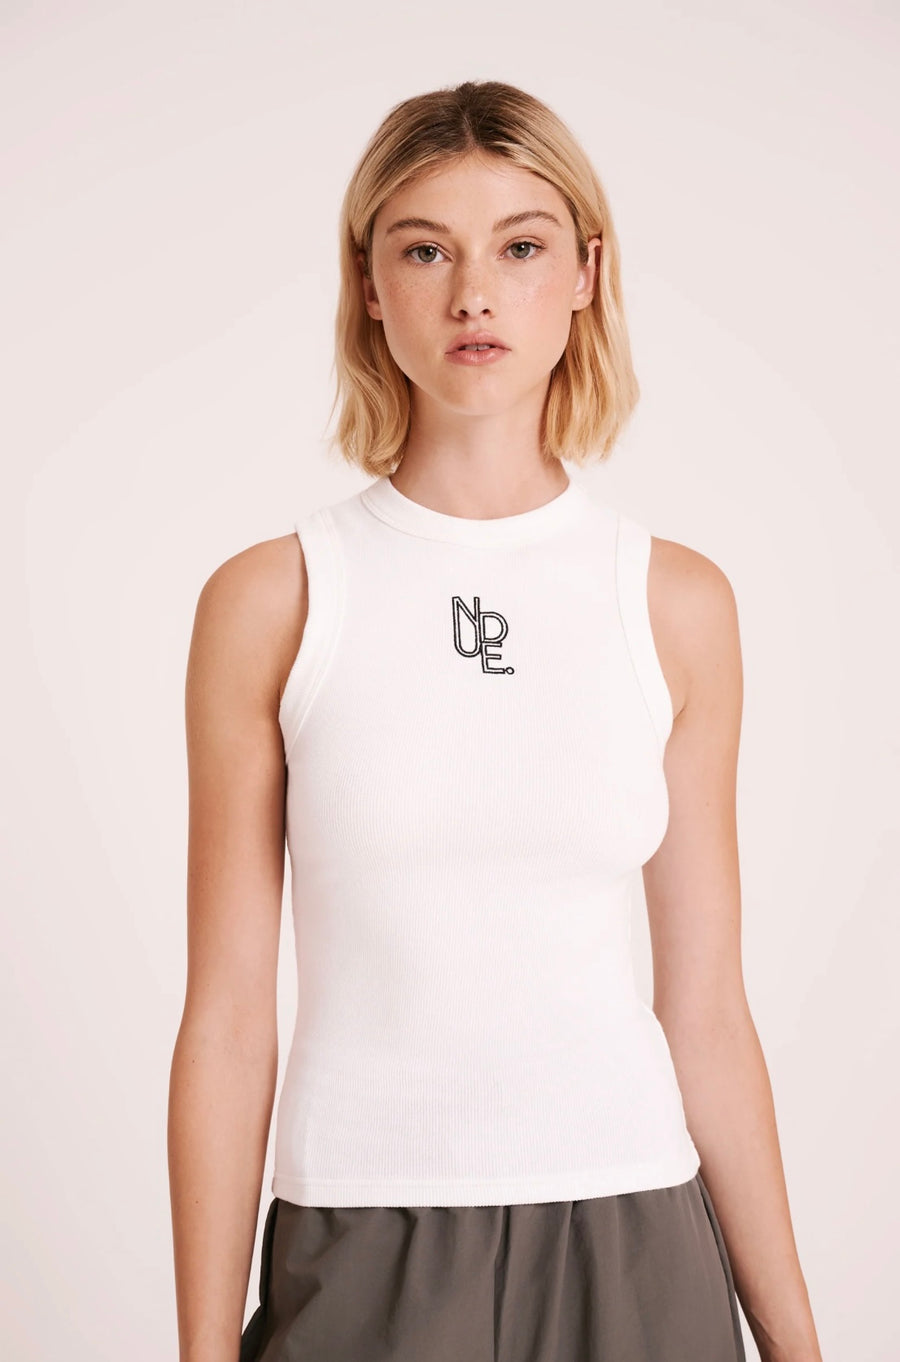 Nude Lucy II HAVEN EMBLEM Tank - white